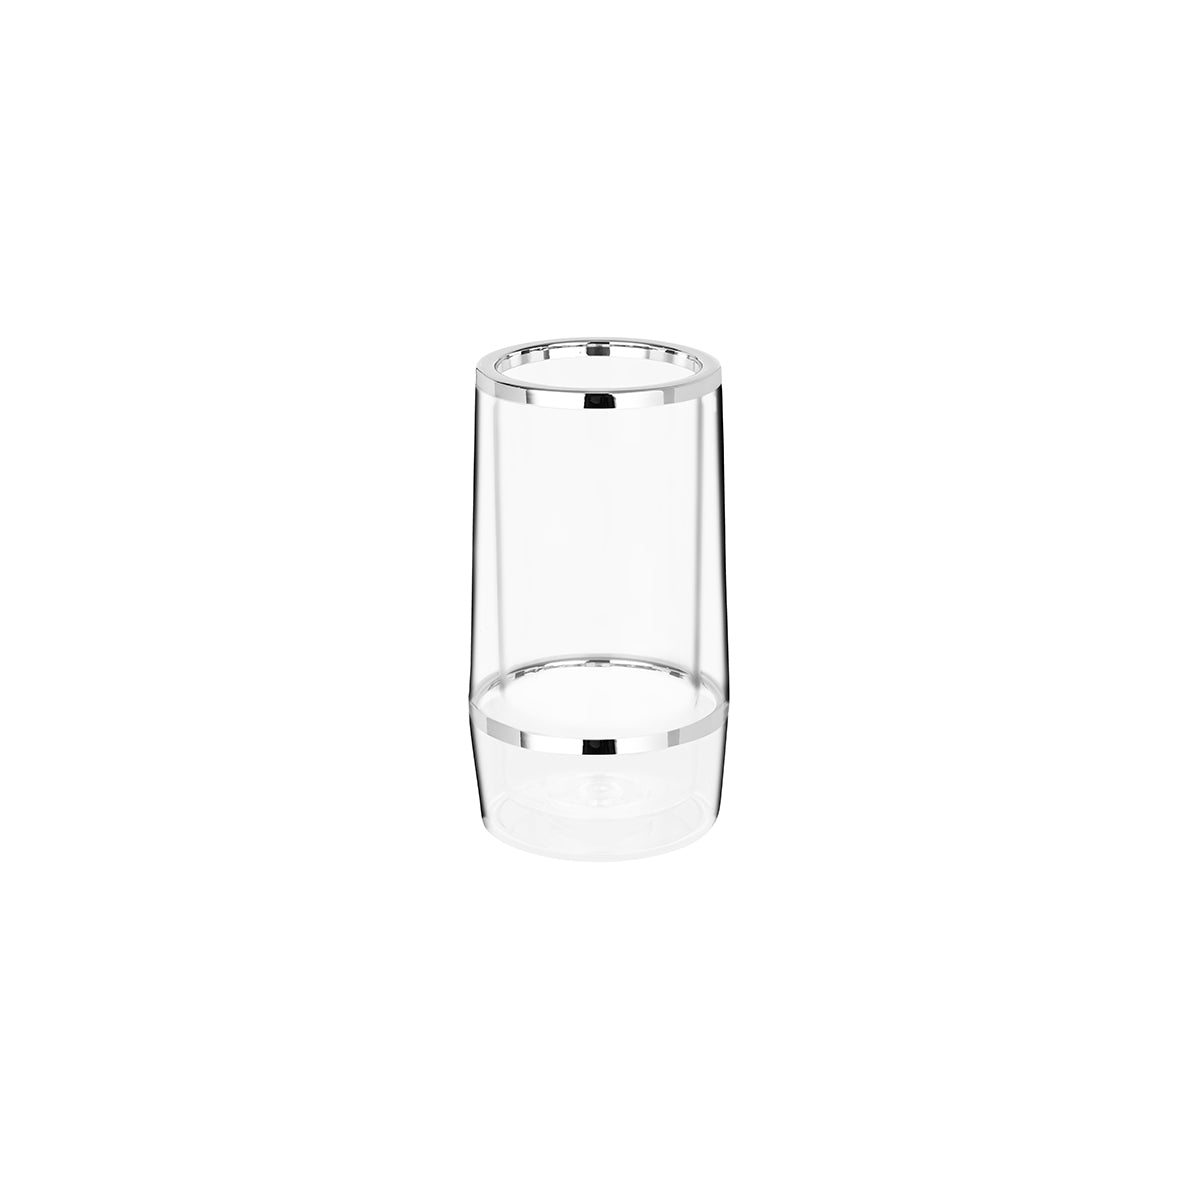 04110 Chef Inox Wine Cooler Insulated Clear Acrylic 125x230mm Tomkin Australia Hospitality Supplies